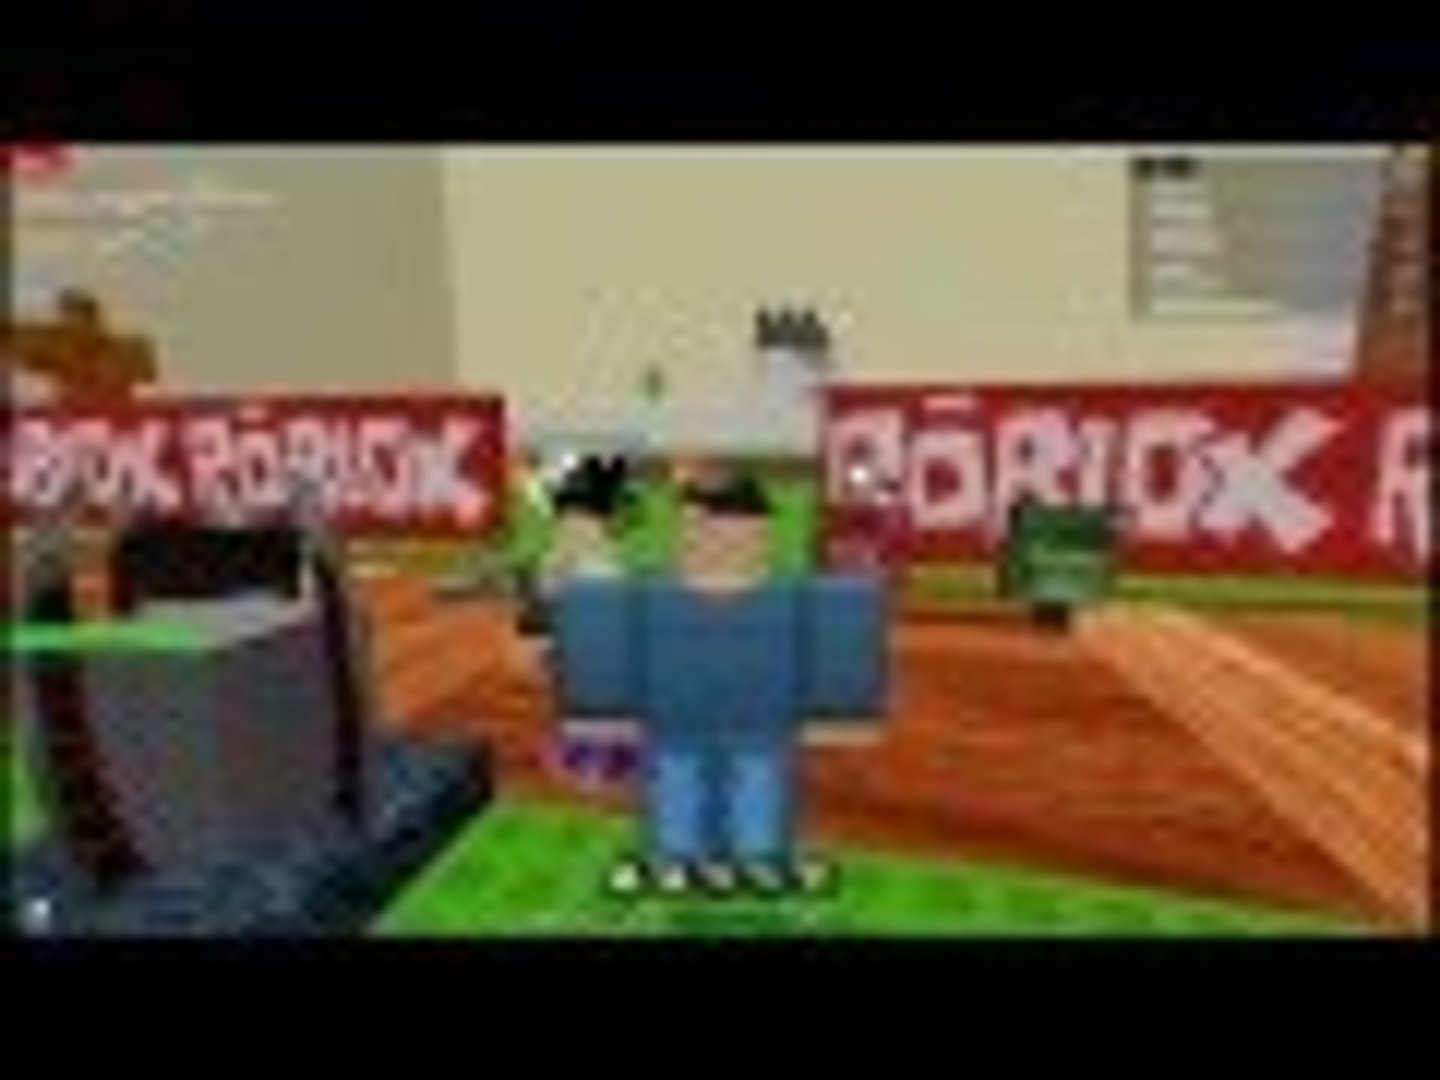 Stamper Build On Roblox Video Dailymotion - stamper build v511 roblox